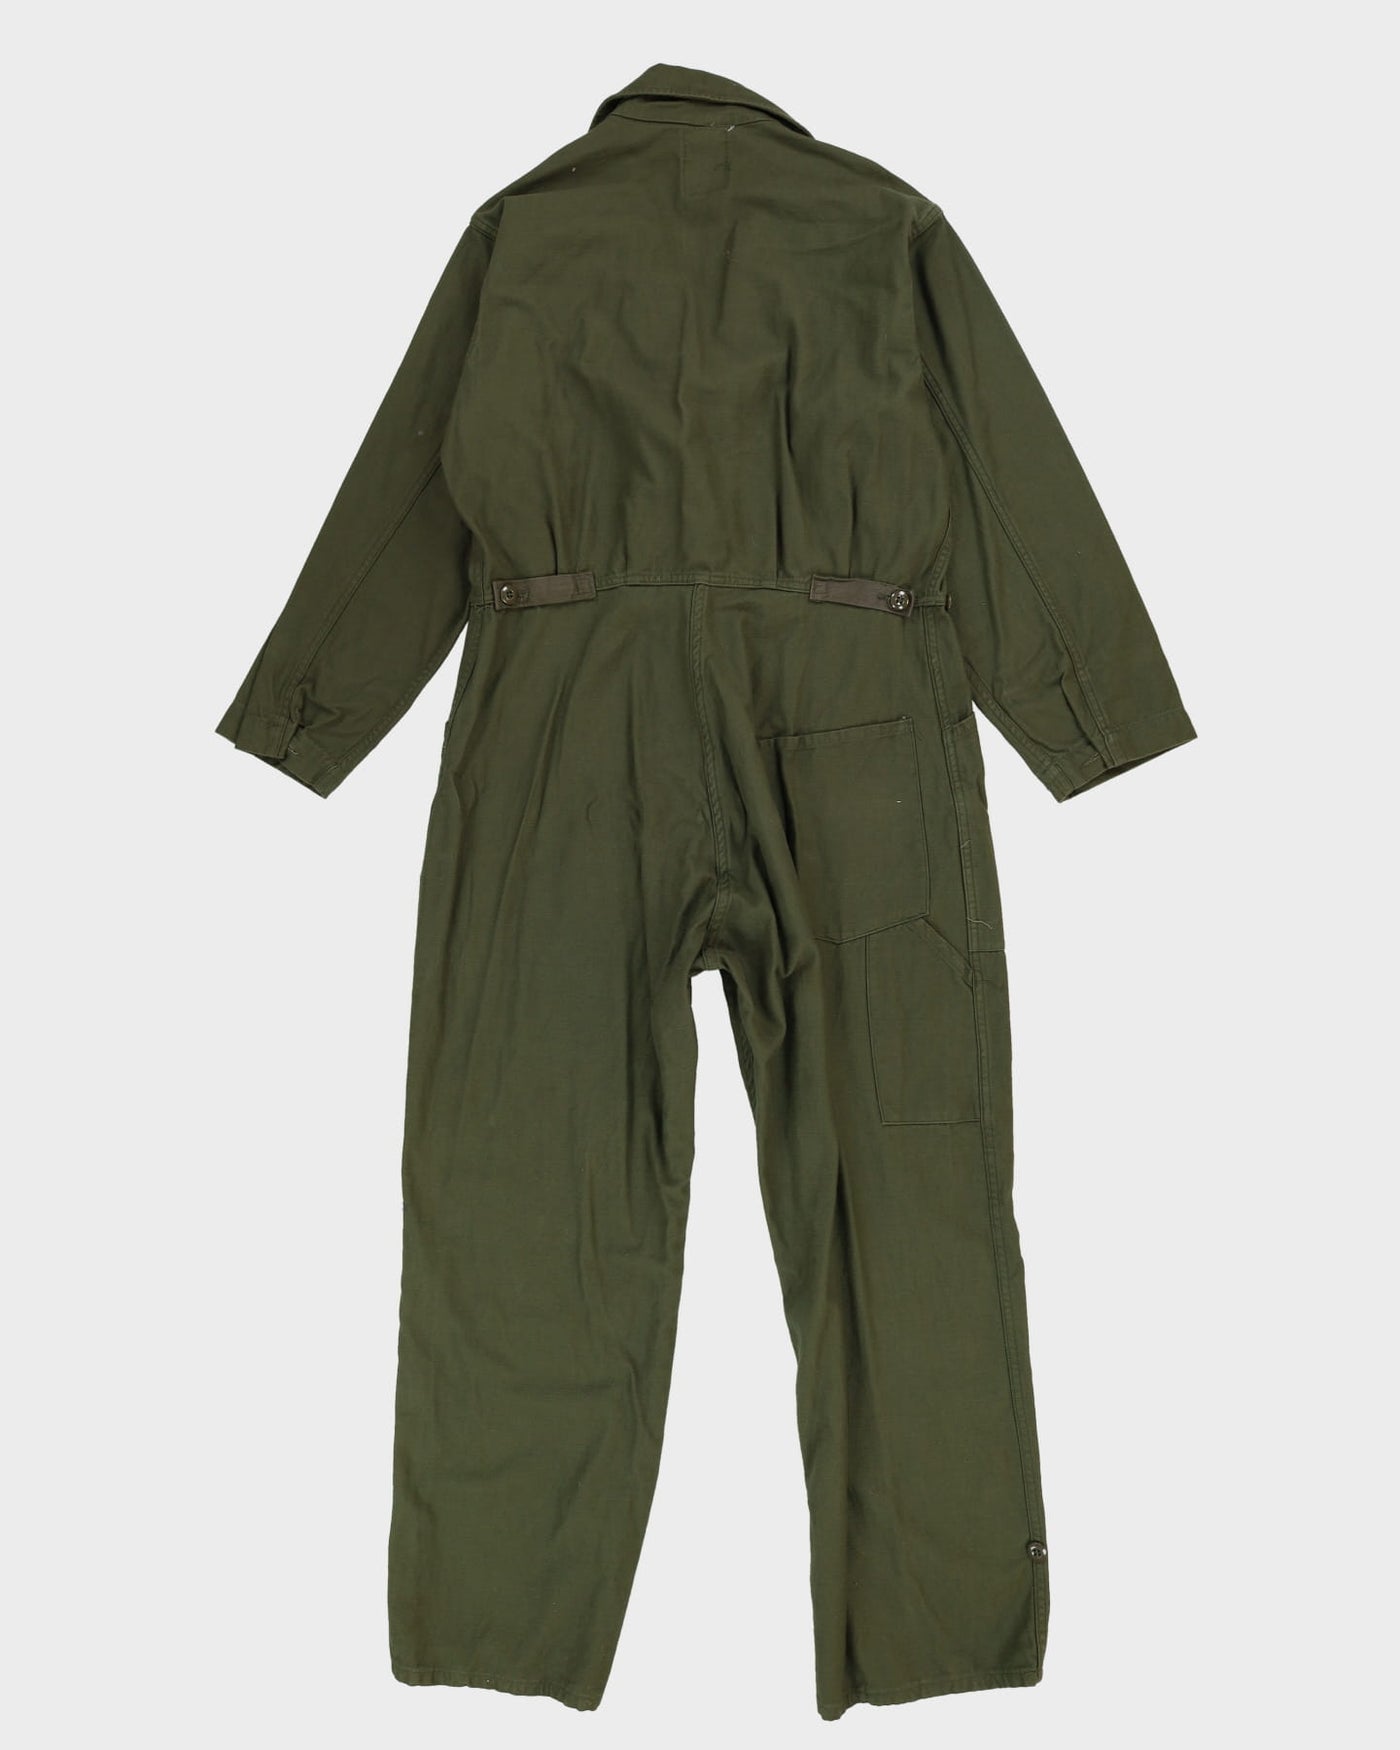 Vintage 1988 Dated US Army Sateen Mechanic Coveralls - X-Large